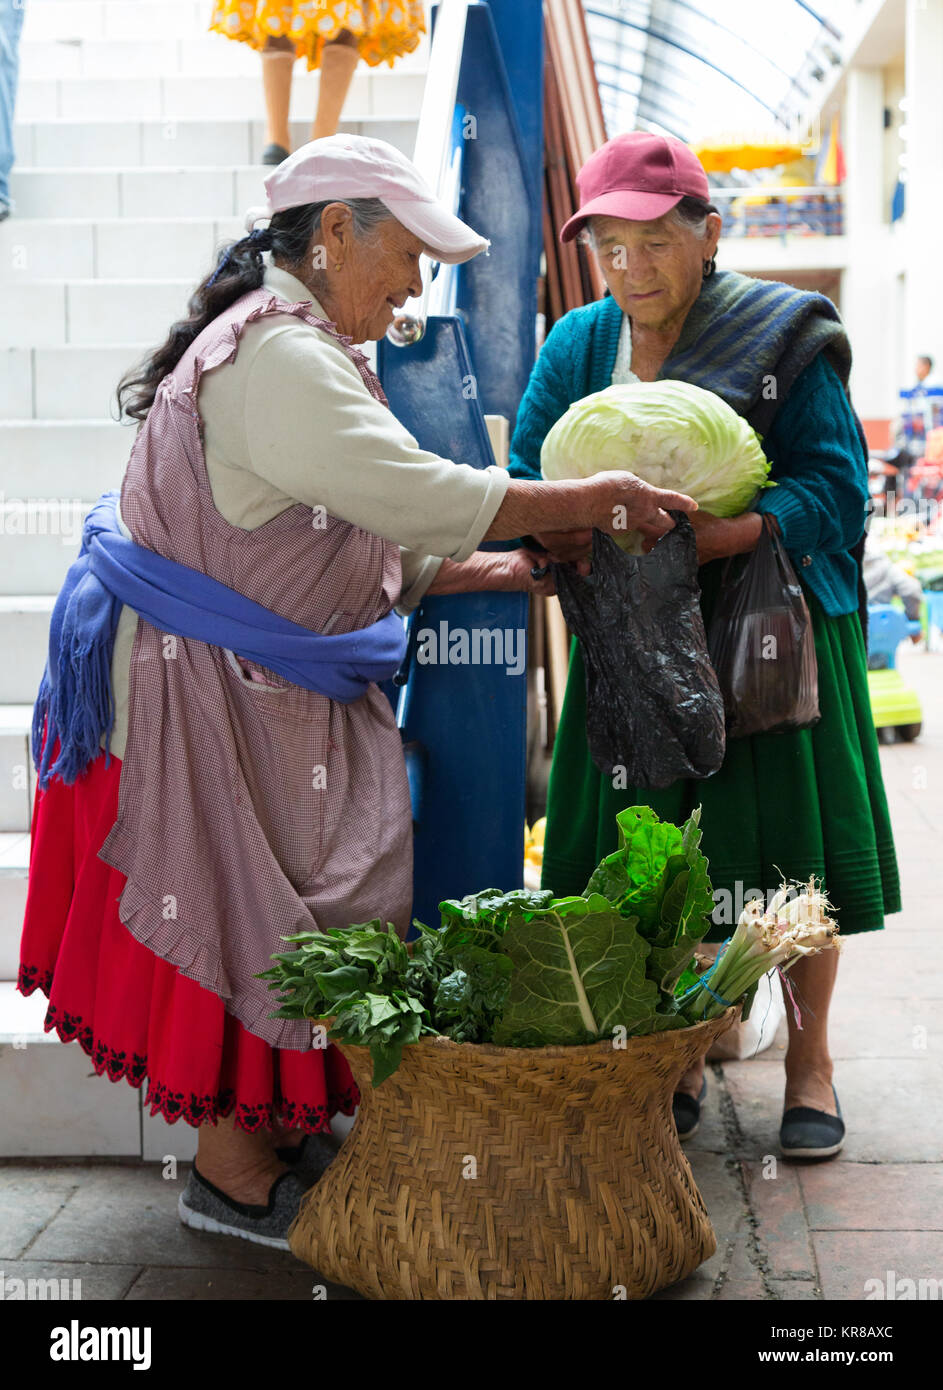 Ecuador women in traditional costume buying and selling food in the indoor market, Gualaceo, southern Ecuador, Latin America, South America Stock Photo